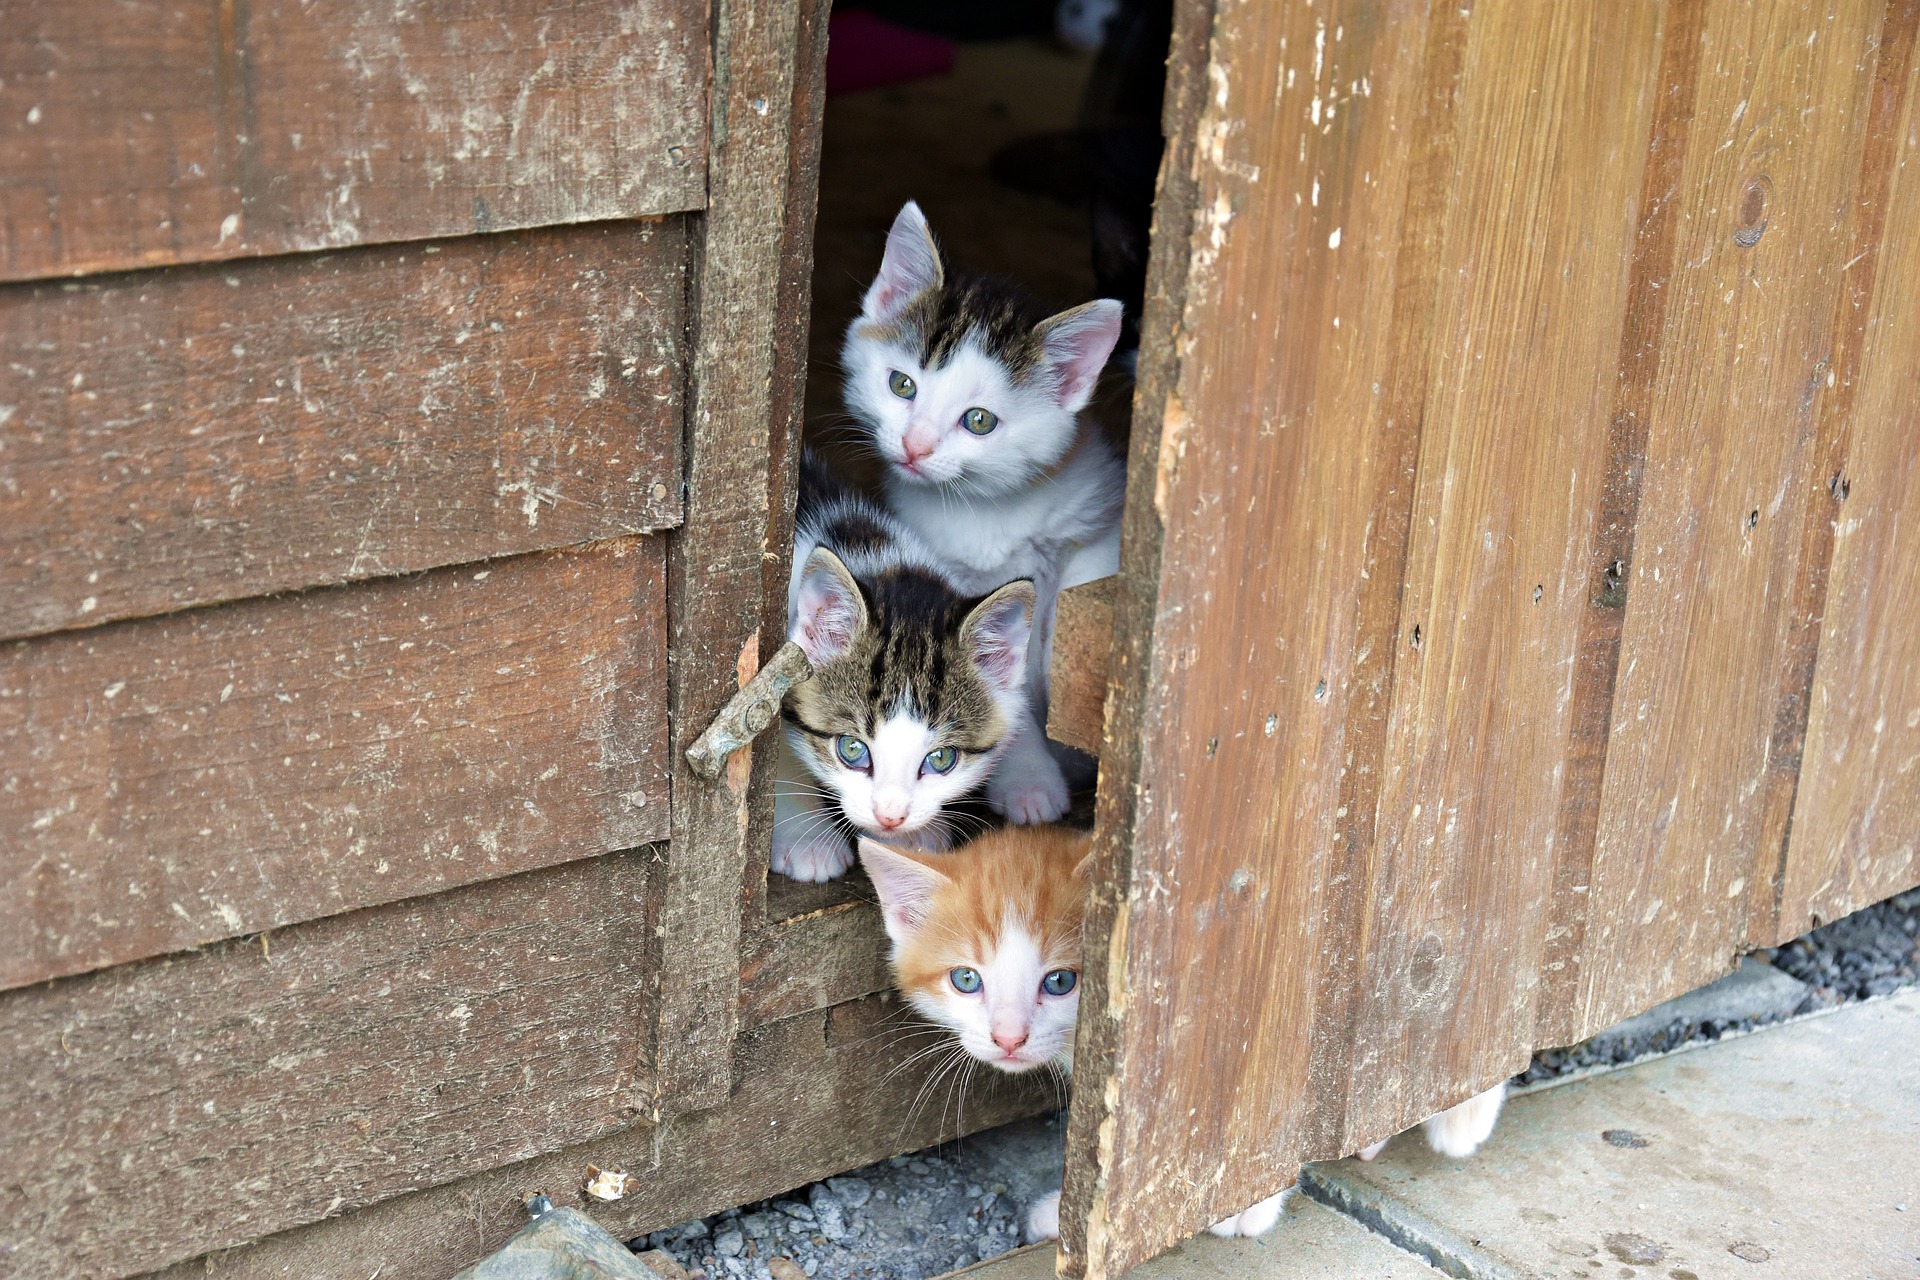 three kittens are peeking out of a wooden door